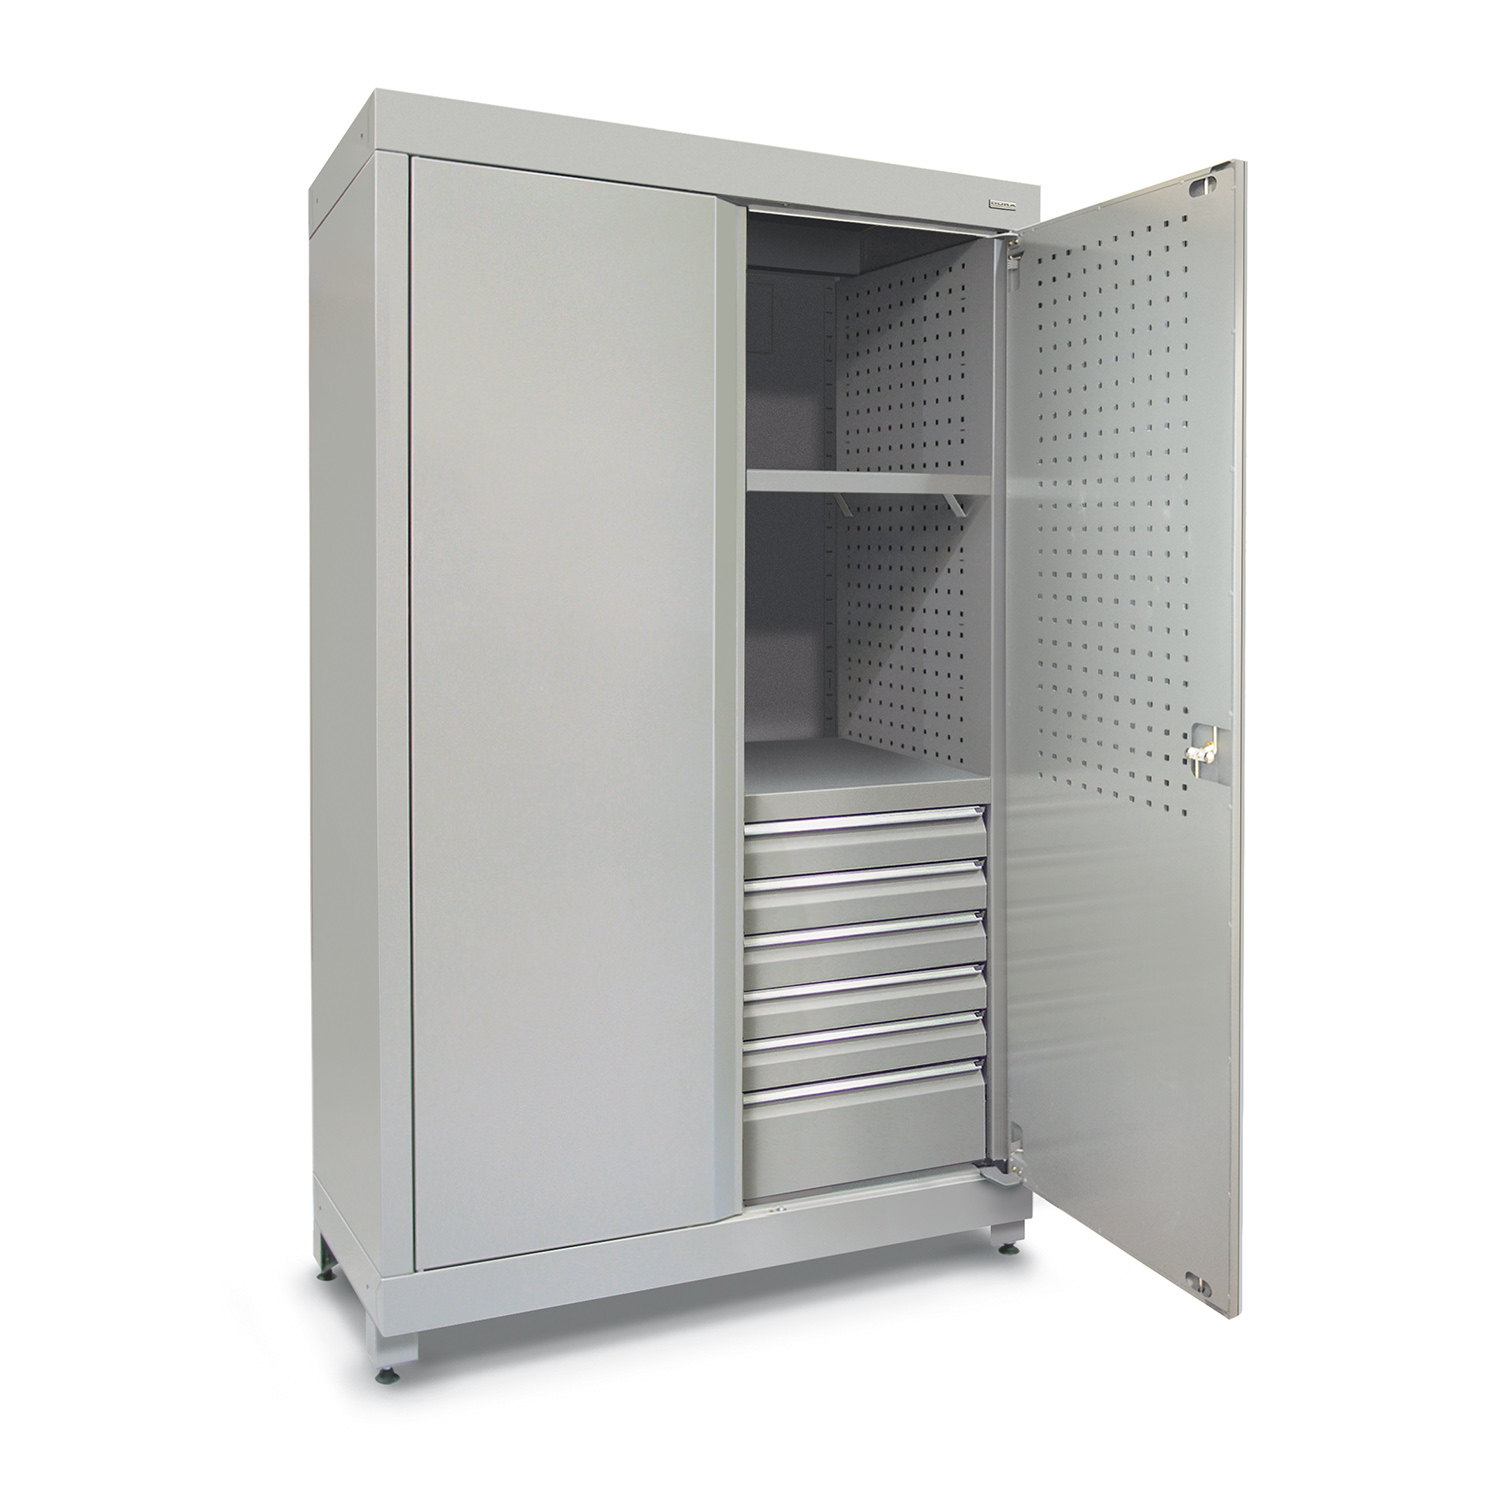 1200mm Heavy-duty shelving unit with 6 drawers